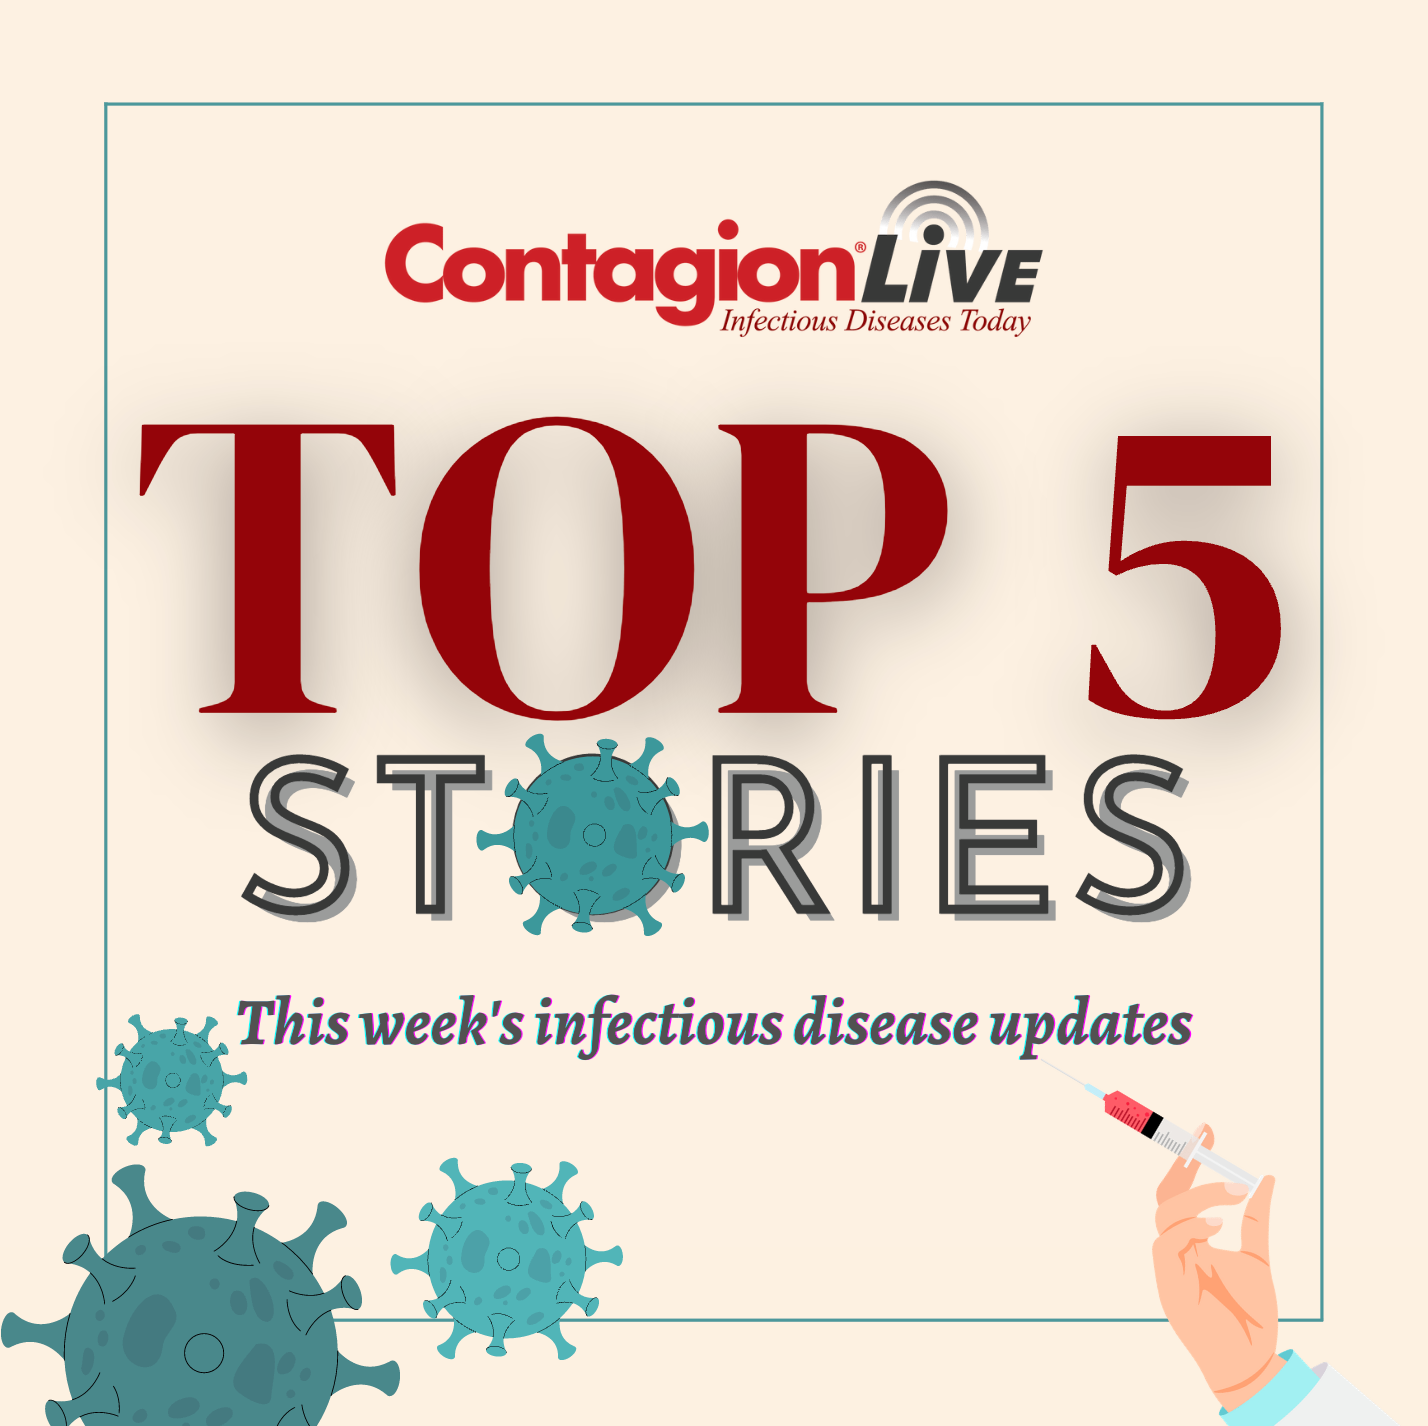 The Rising Threat of Salmonella, Anticipated FDA Approvals, and More: The Week’s Top 5 Stories